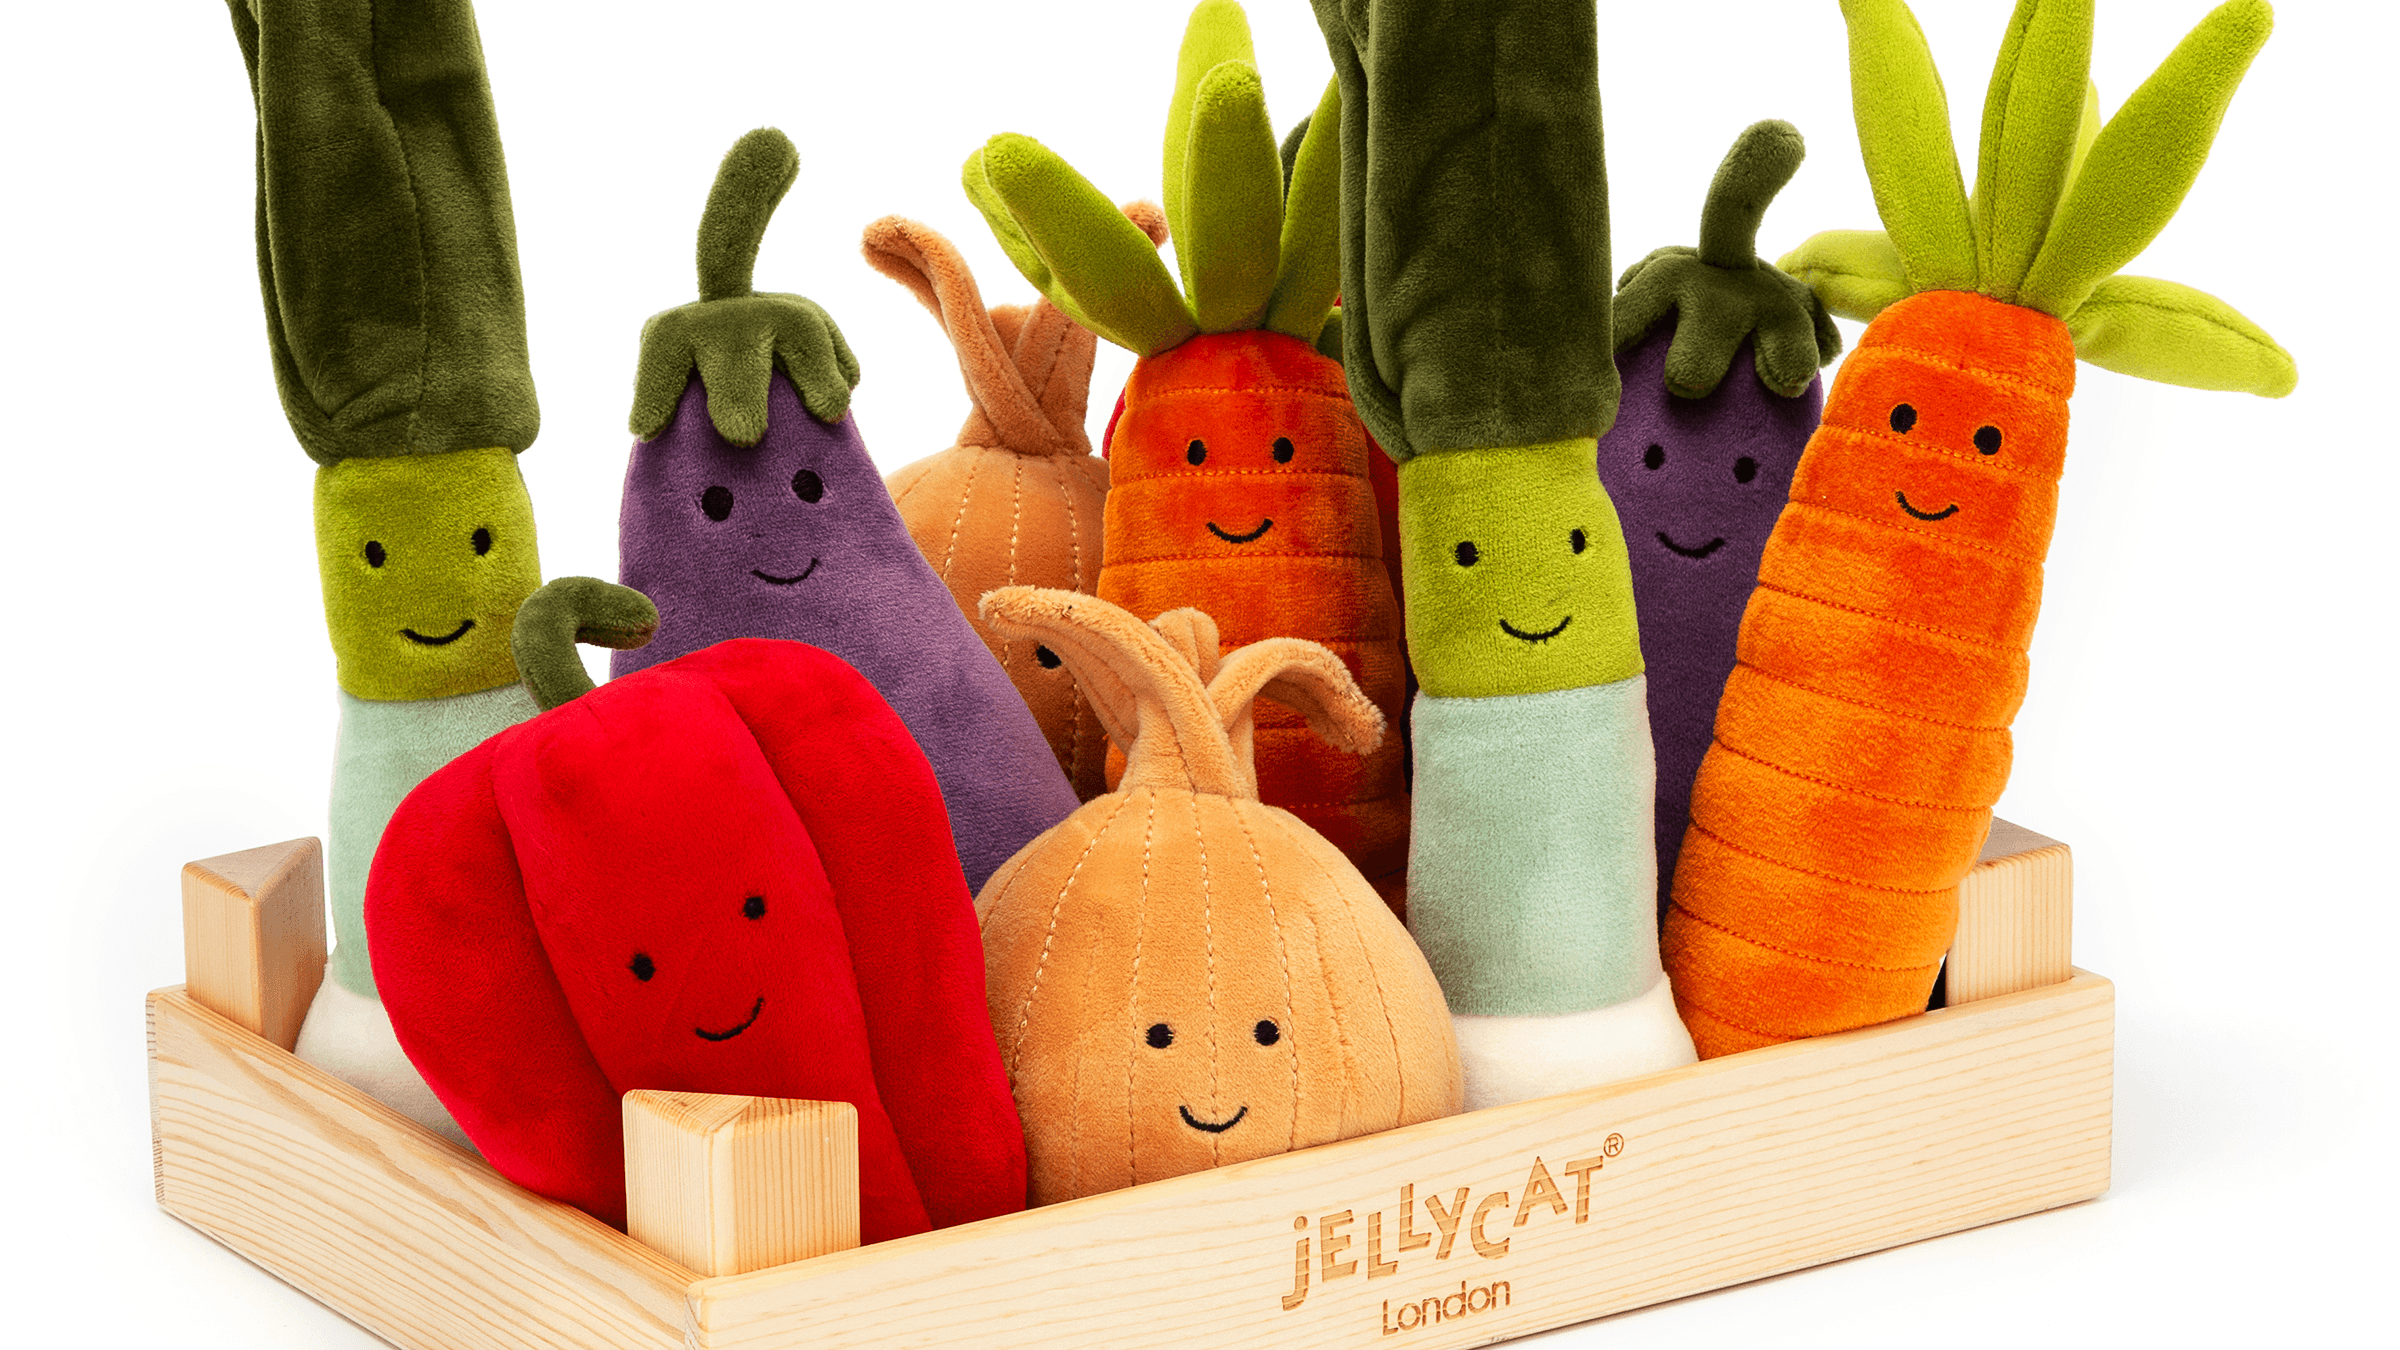 A collection of Jellycat's stuffed toys in the shape of vegetables